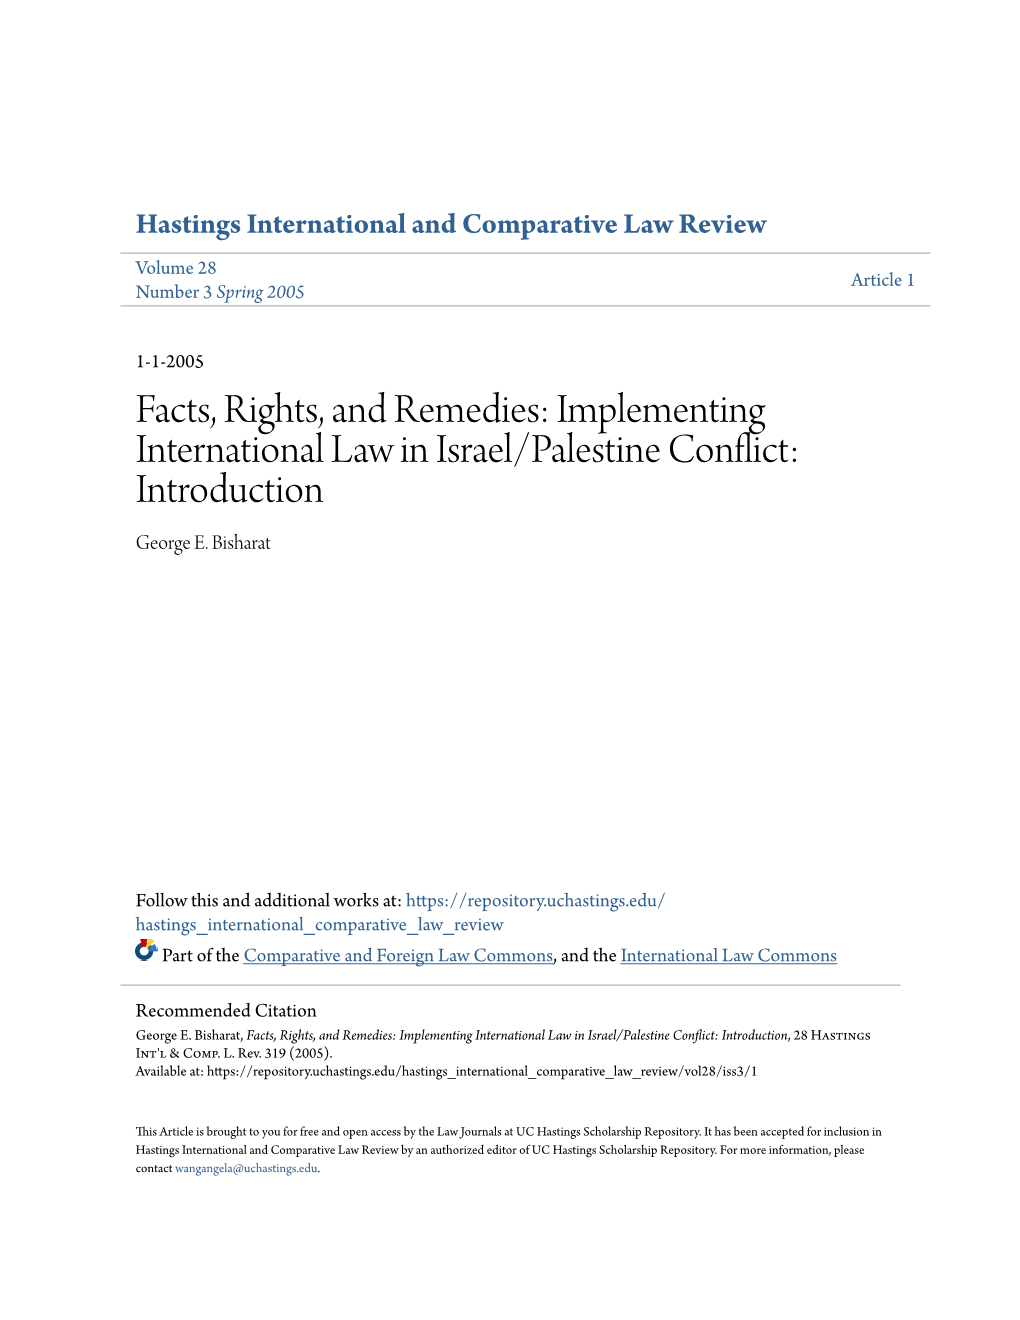 Implementing International Law in Israel/Palestine Conflict: Introduction George E